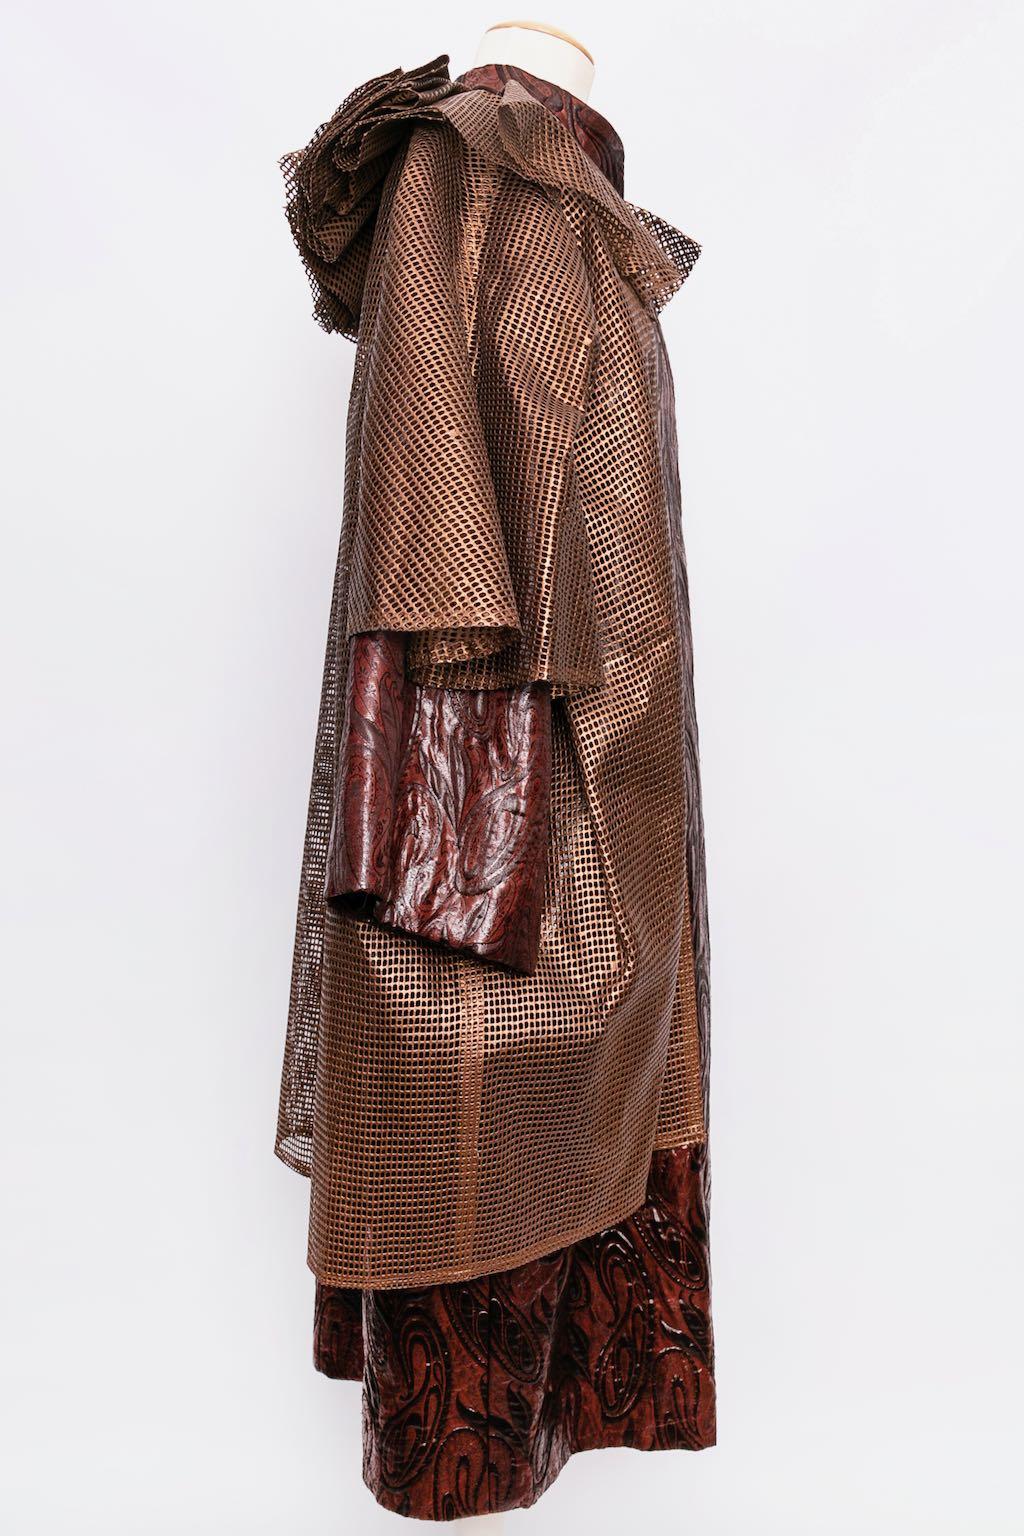 Women's Paco Rabanne Haute Couture Coat in Textured Canvas